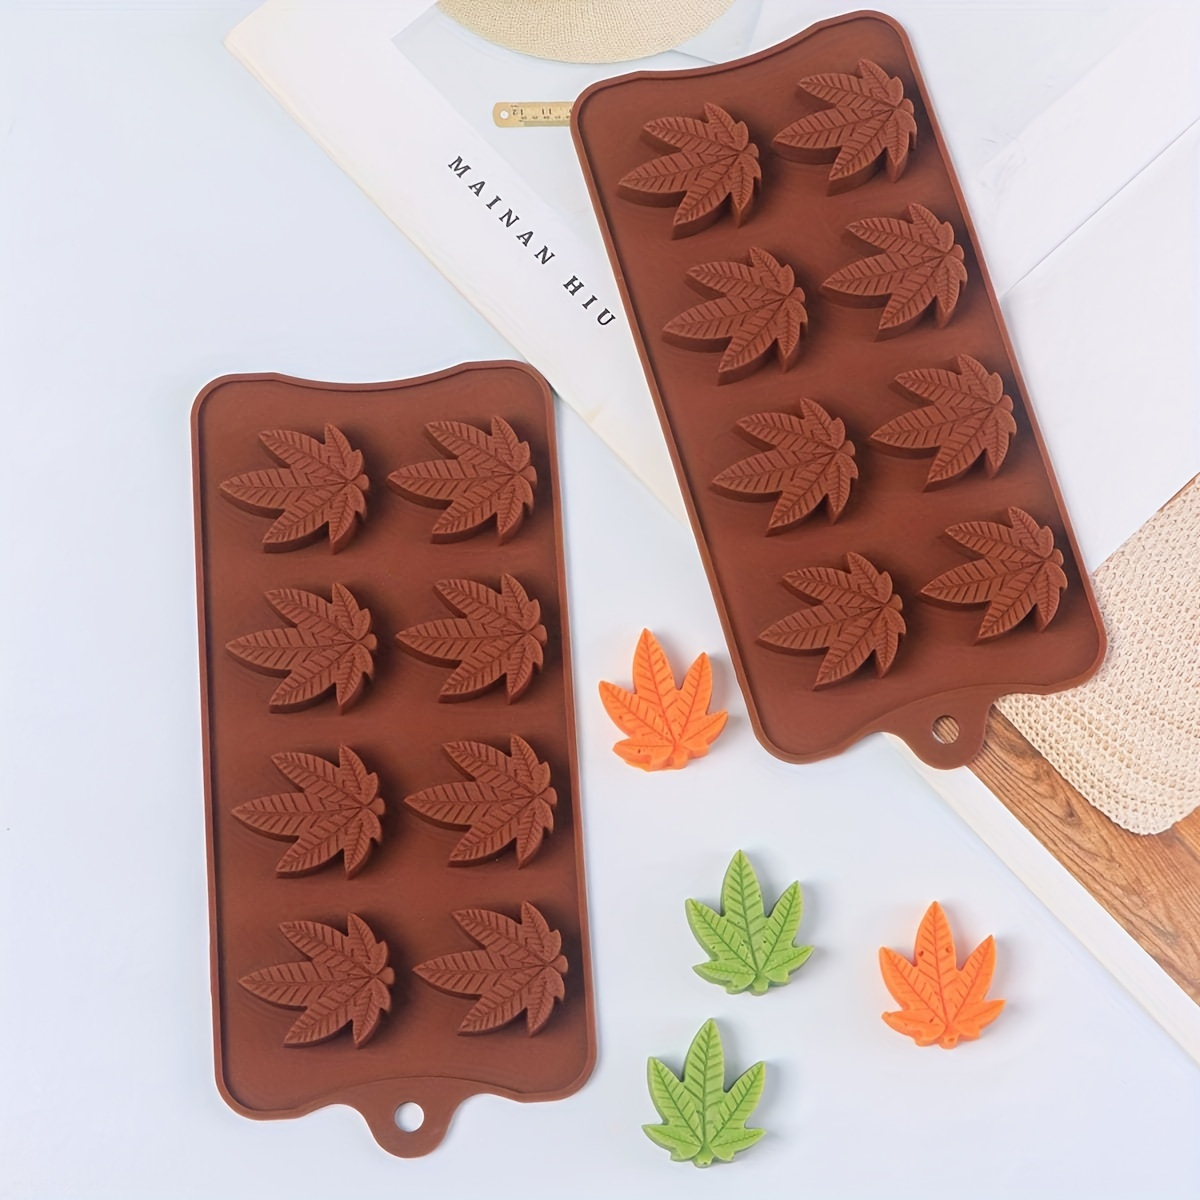 1pc Silicone Mold With 10 Maple Leaf-shaped Cavities For Chocolate Making